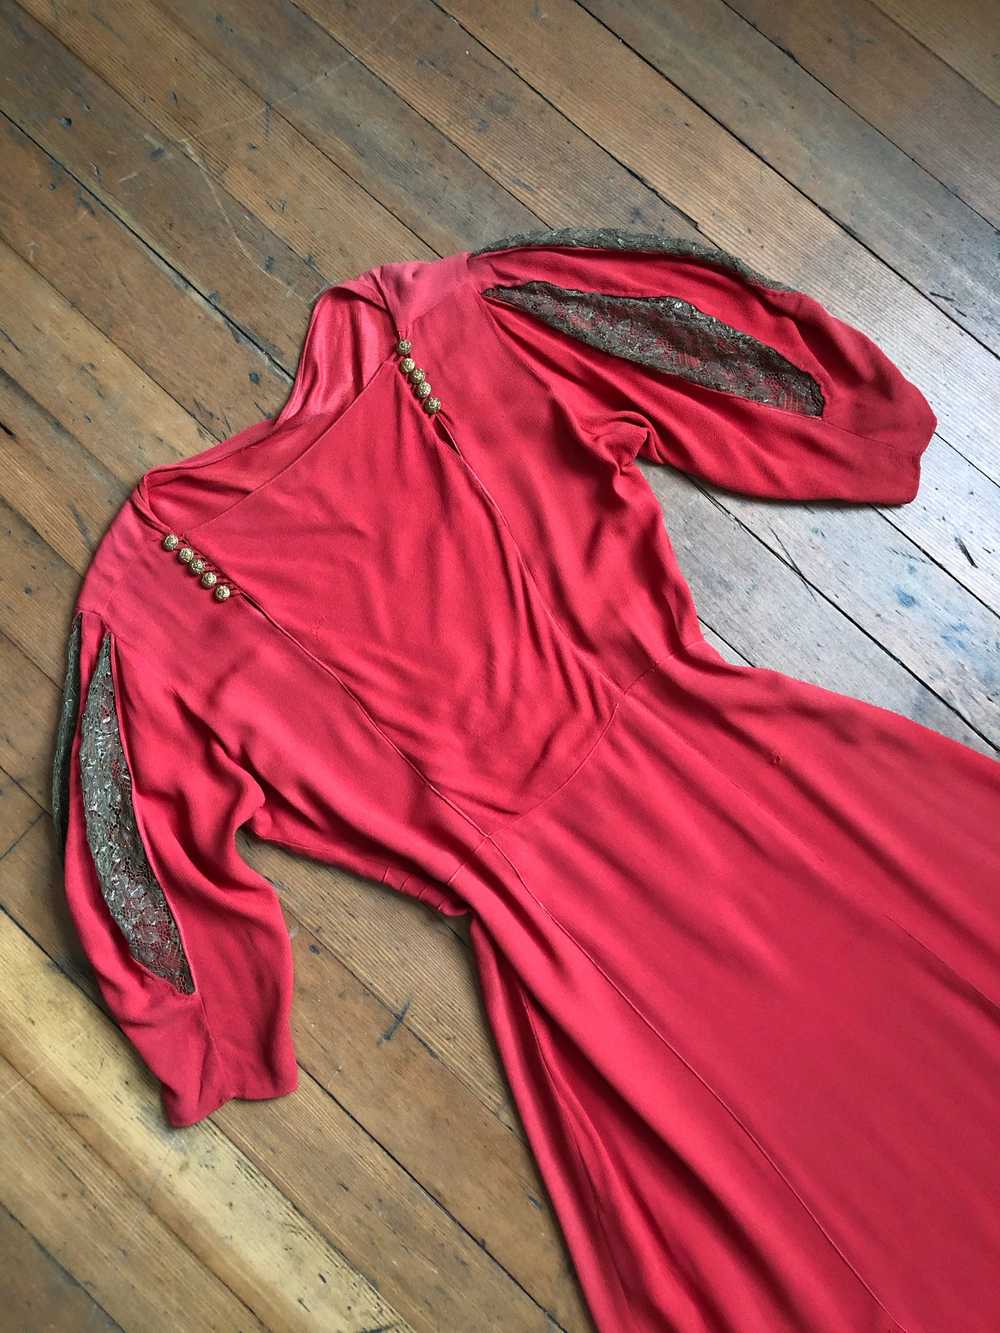 MARKED DOWN vintage 1930s orange rayon gown - image 10